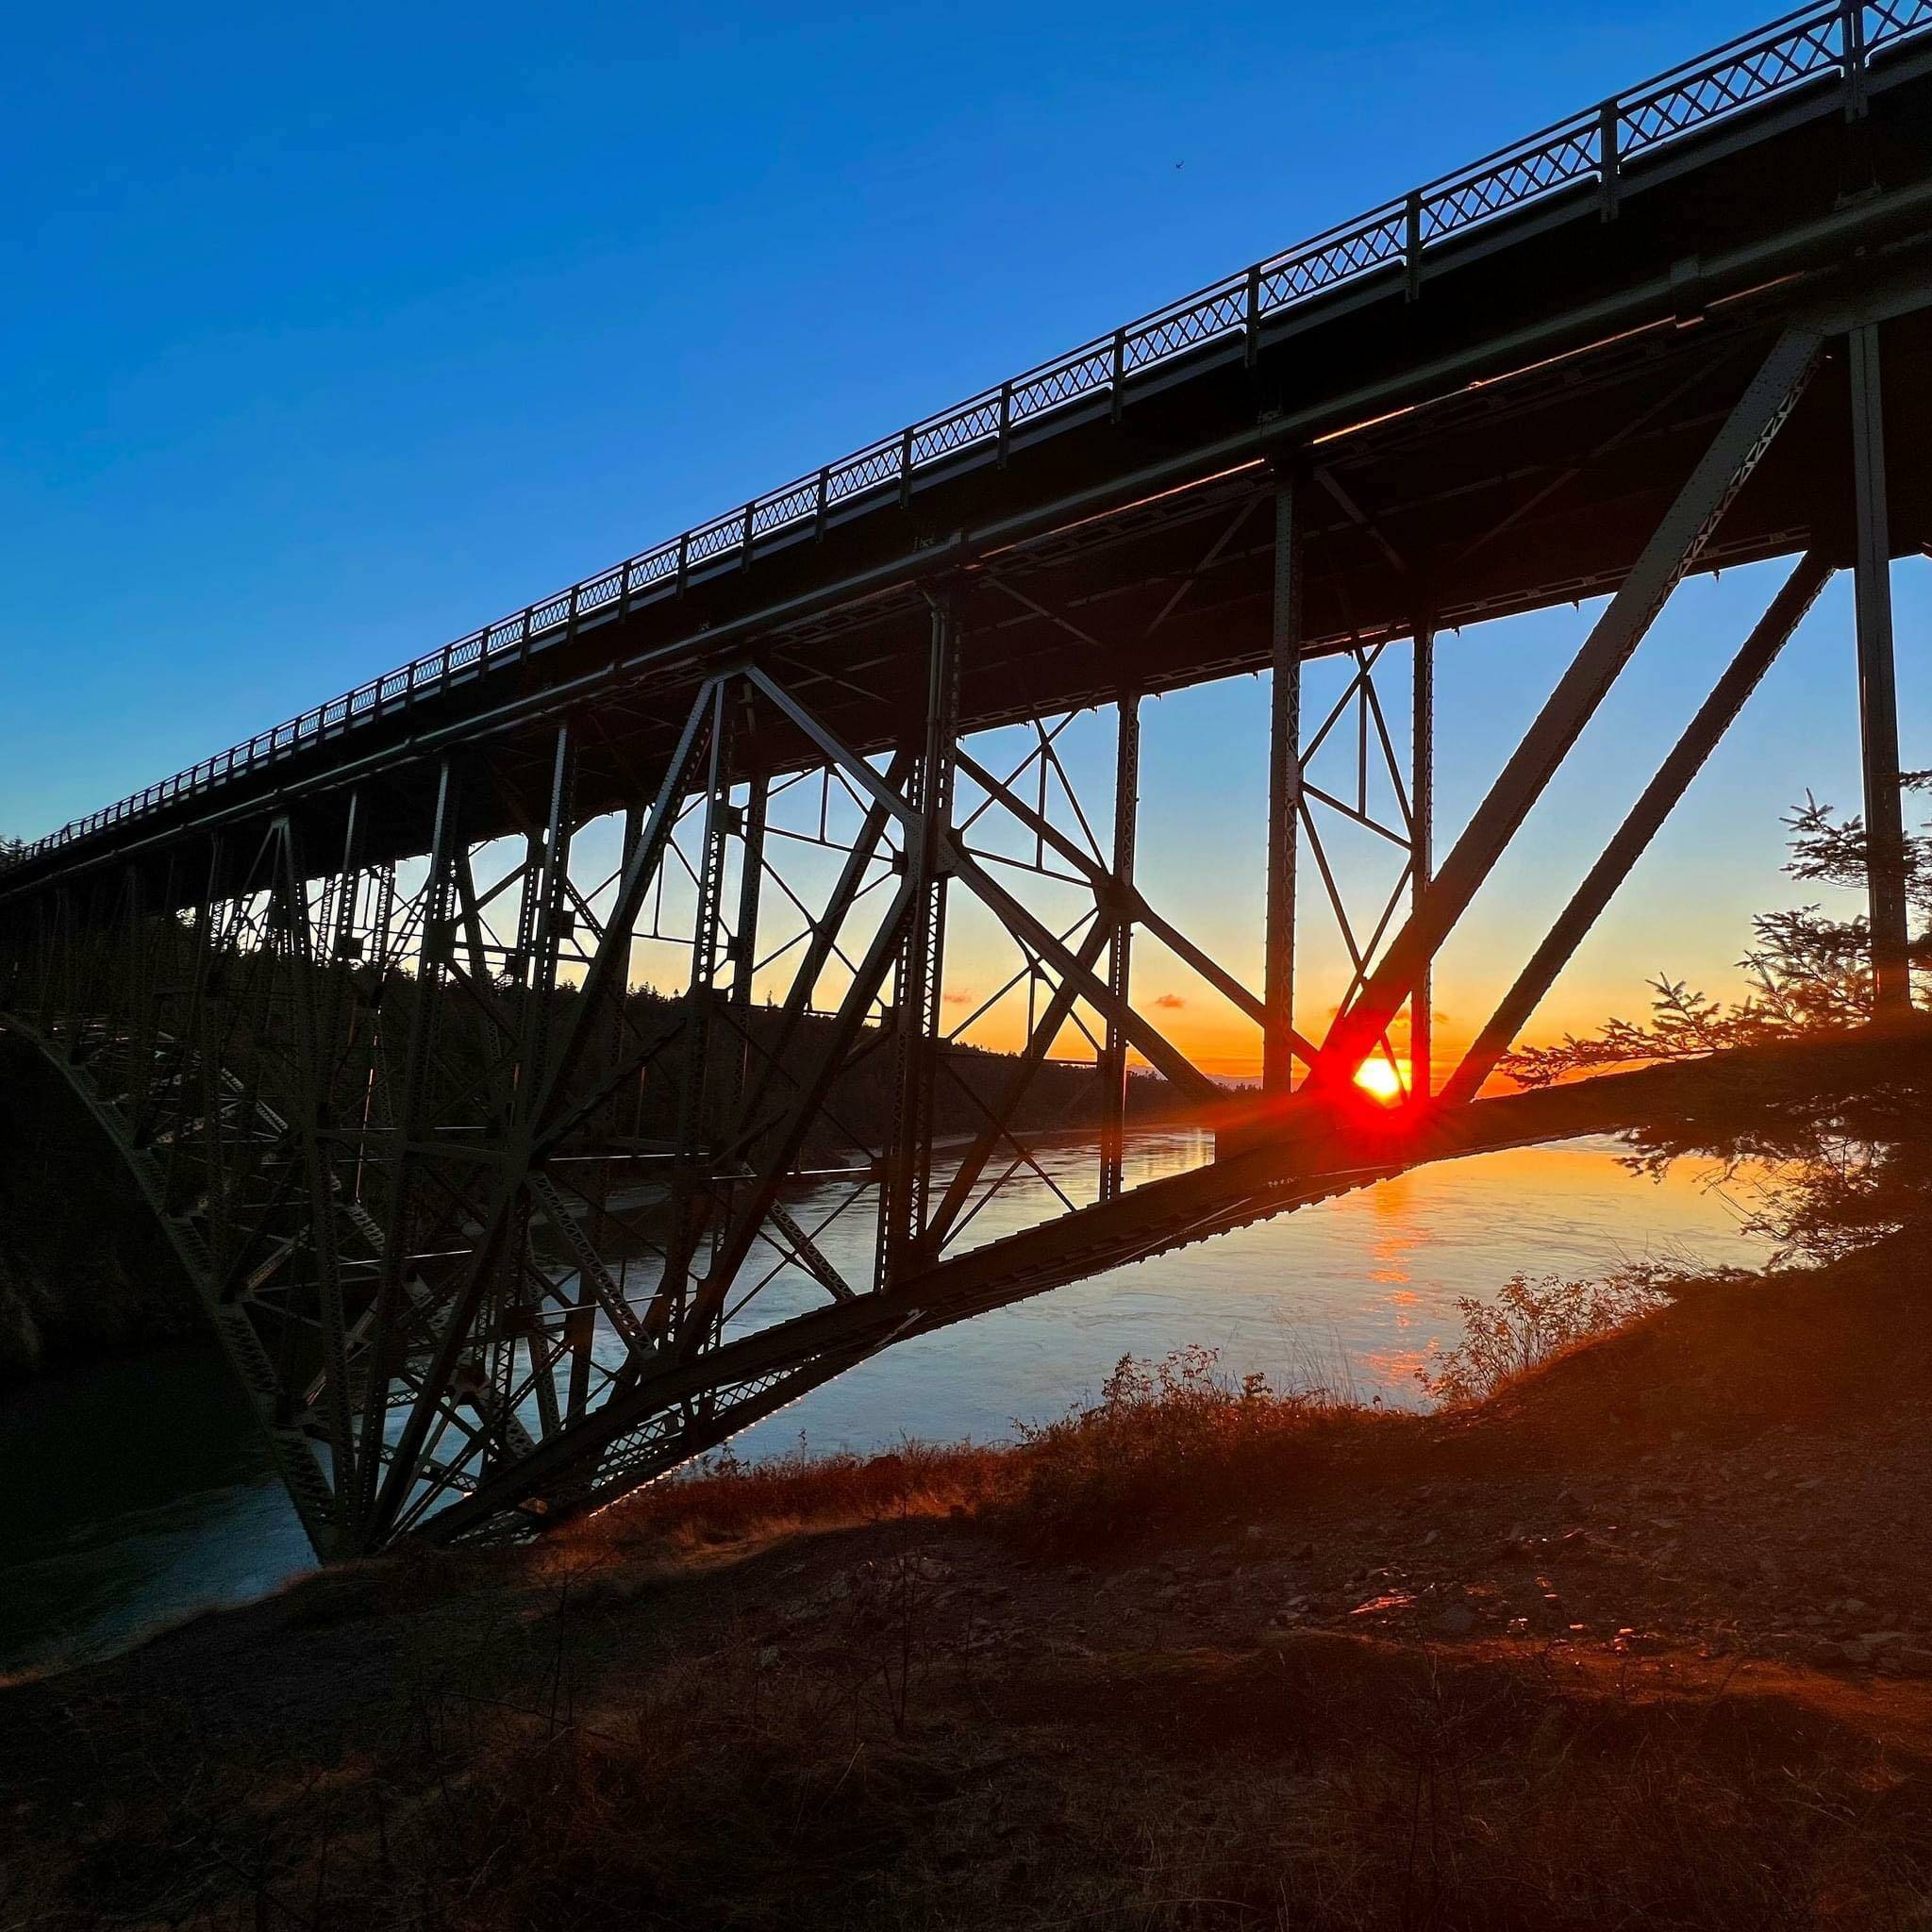 Deception Pass State Park offers scenic views of the bridge and much more.